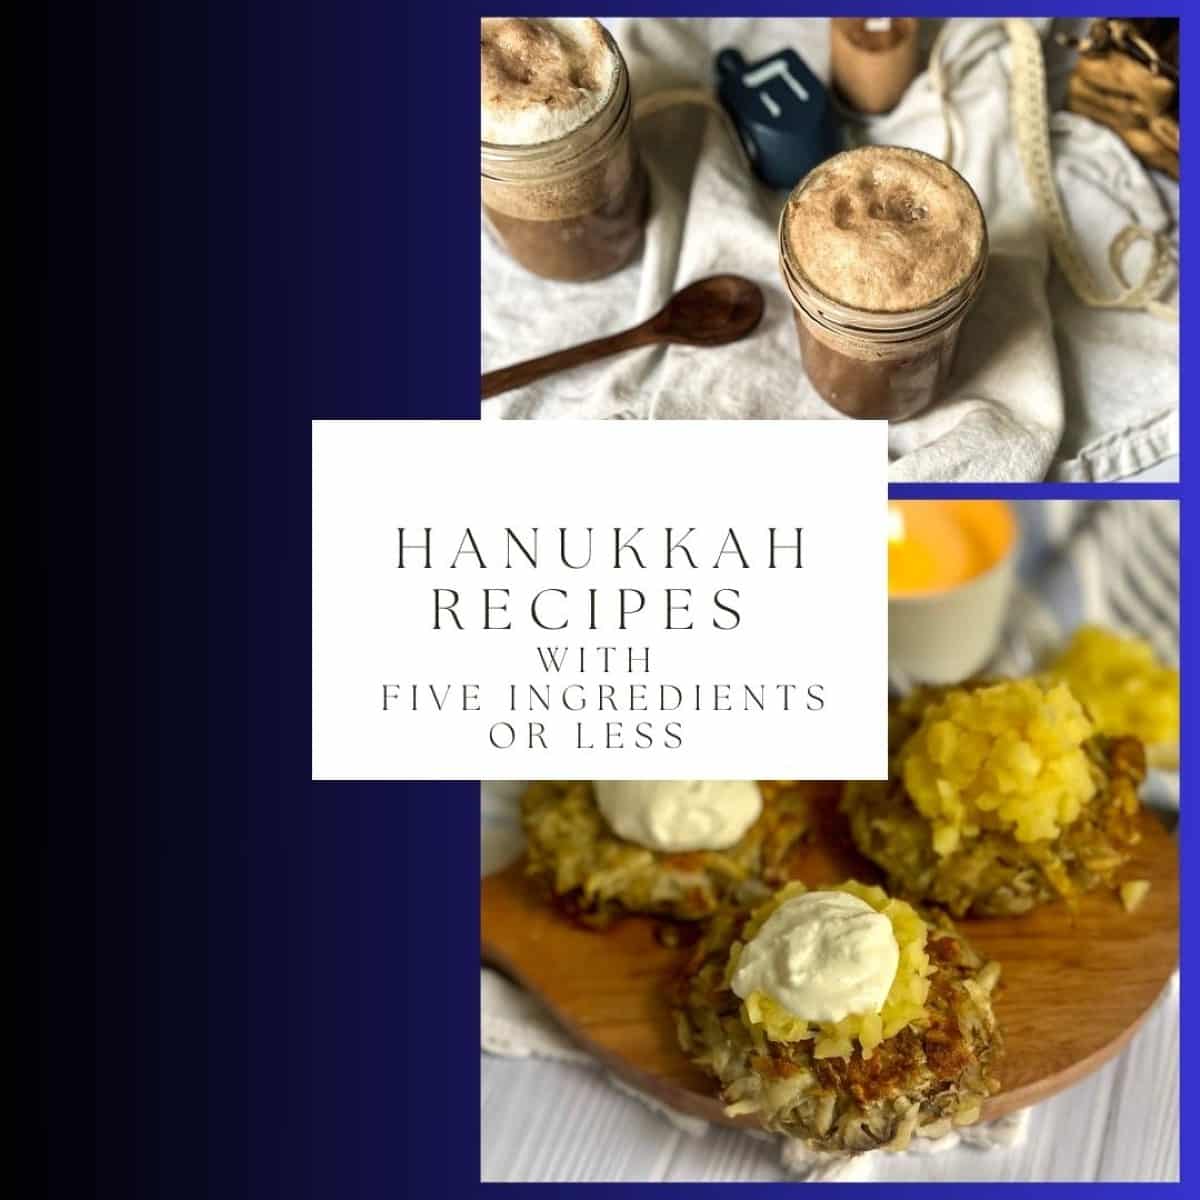 An image of a collection of Hanukkah recipes with five ingredients or less. The recipes include potato pancakes, latkes, sufganiyot, and chocolate babka. The image is festive and colorful, with illustrations of each dish and the text "Hanukkah Recipes with Five Ingredients or Less" in bold letters.